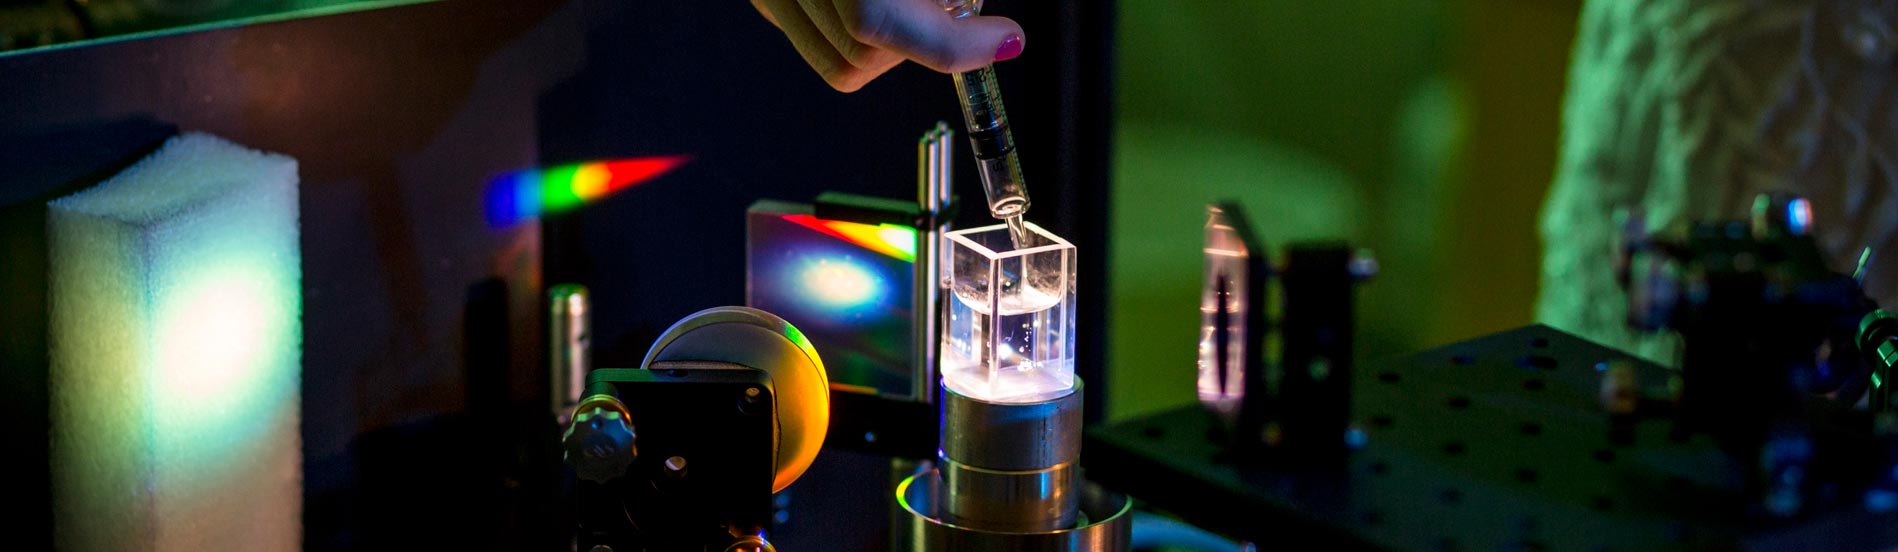 Close-up image of a physics experiment